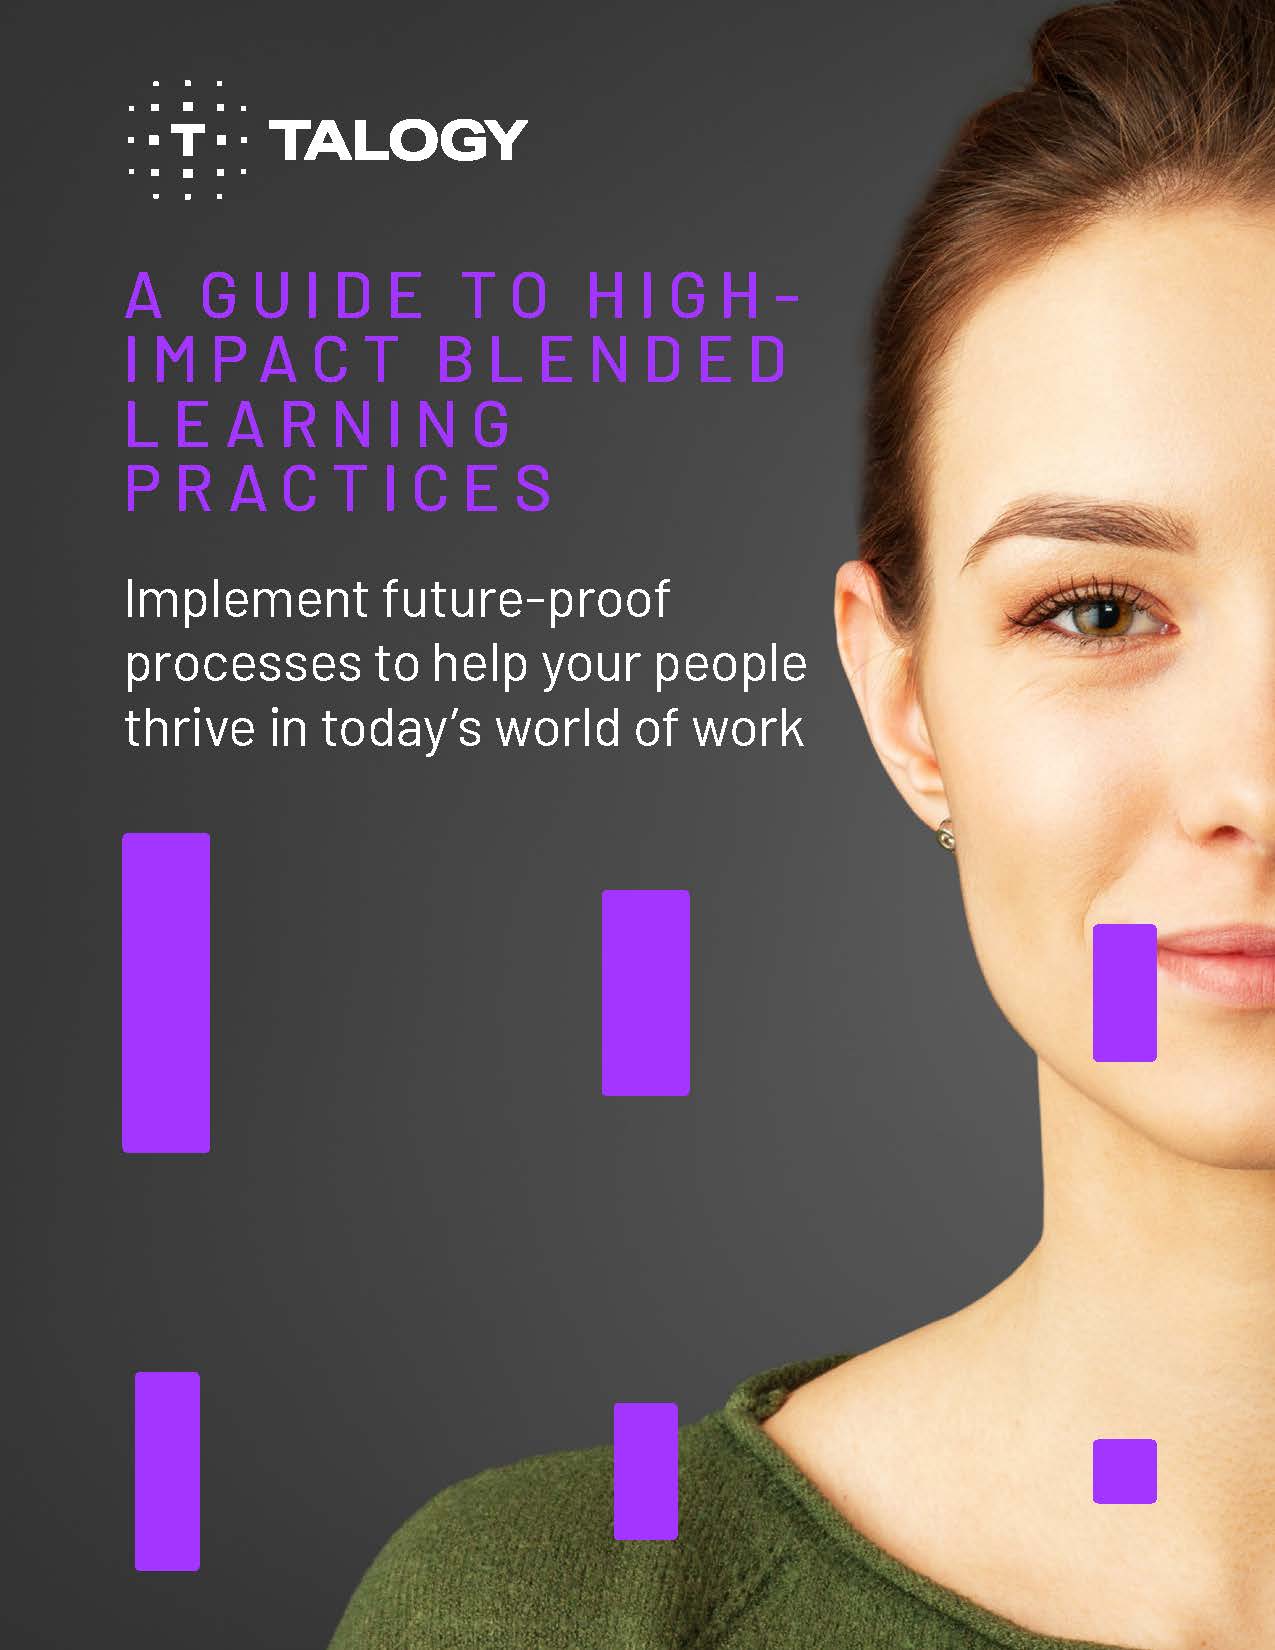 Talogy_Advice Guide Cover_A GUIDE TO HIGH-IMPACT BLENDED LEARNING PRACTICES